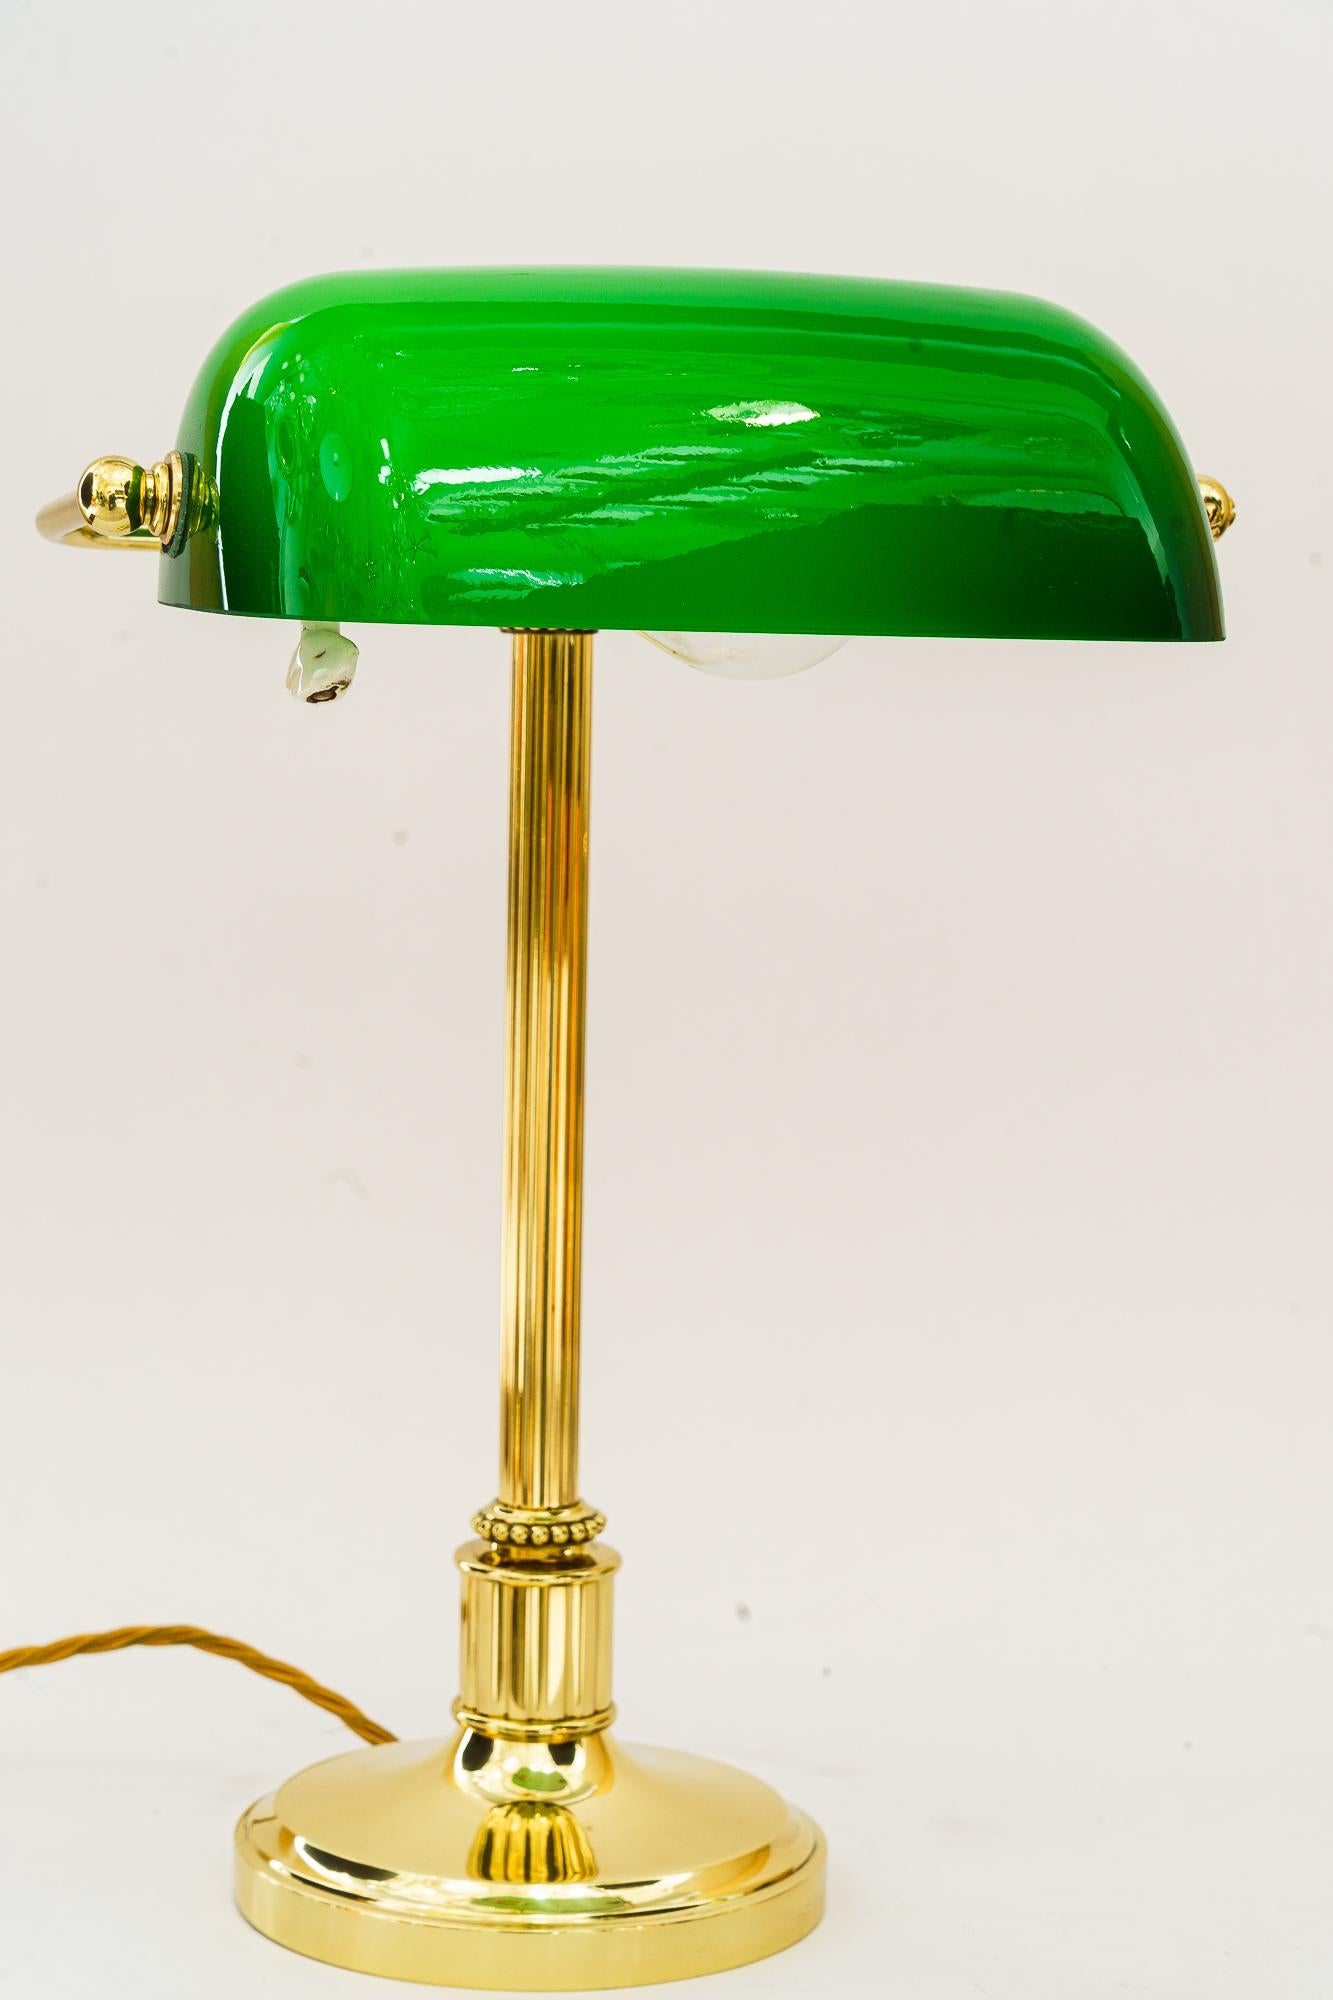 Austrian Art Deco Banker Lamp with Green Glass Shade, Vienna, Around 1920s For Sale